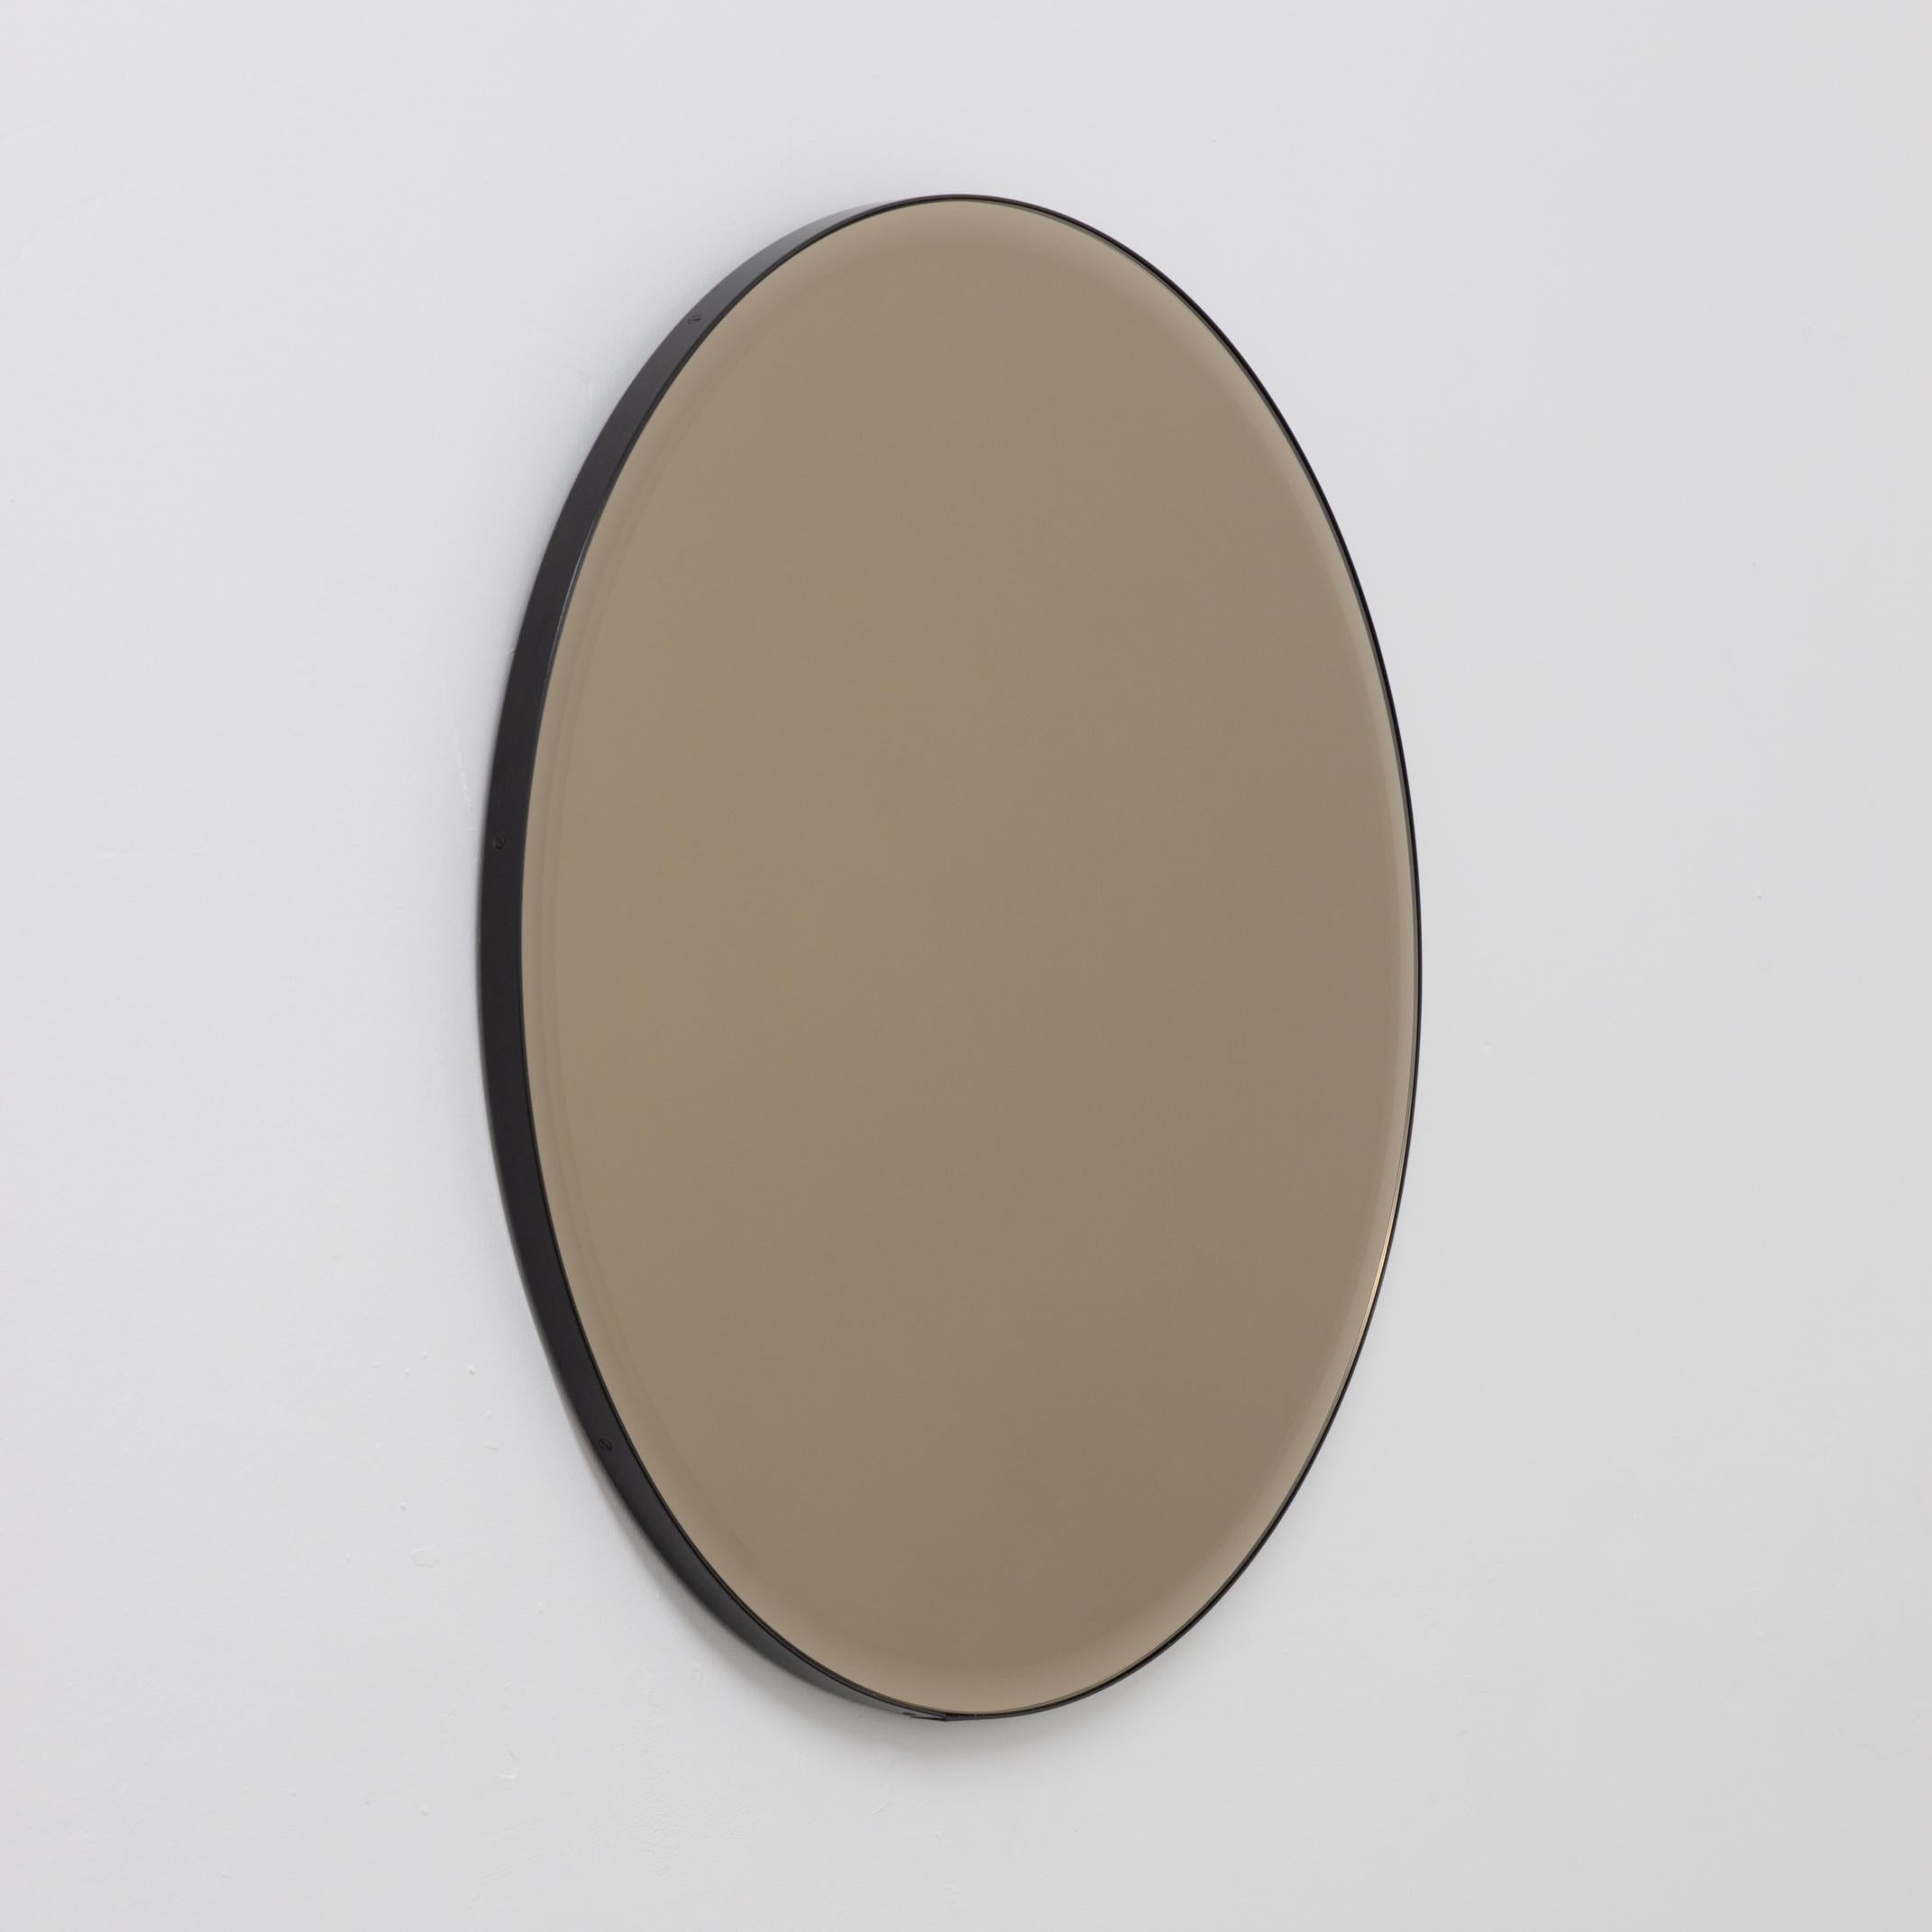 Decorative bevelled bronze tinted round mirror with an elegant aluminium powder coated black frame. Designed and handcrafted in London, UK.

Medium, large and extra-large mirrors (60, 80 and 100cm) are fitted with an ingenious French cleat (split